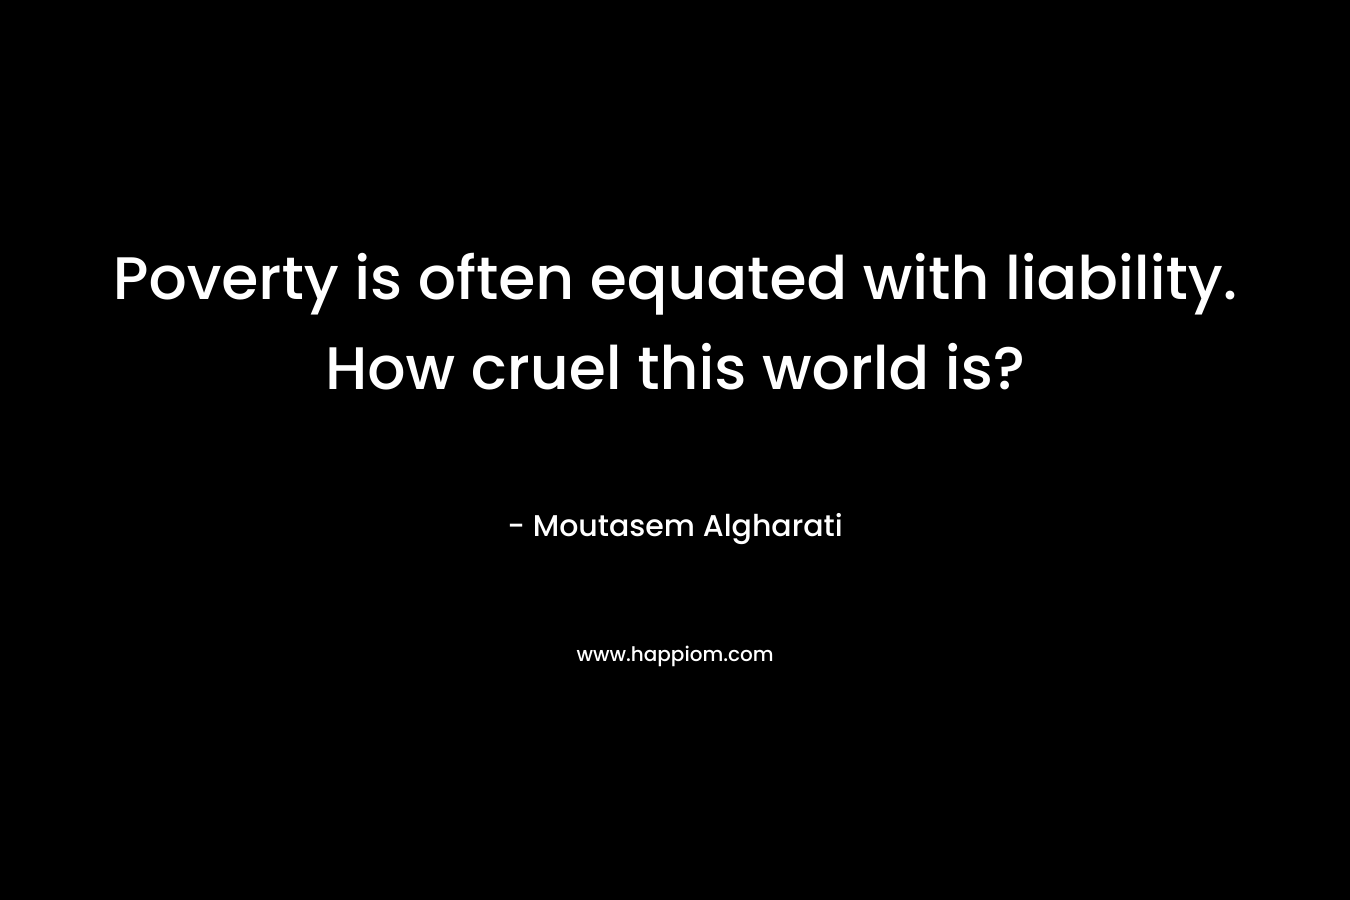 Poverty is often equated with liability. How cruel this world is? – Moutasem Algharati